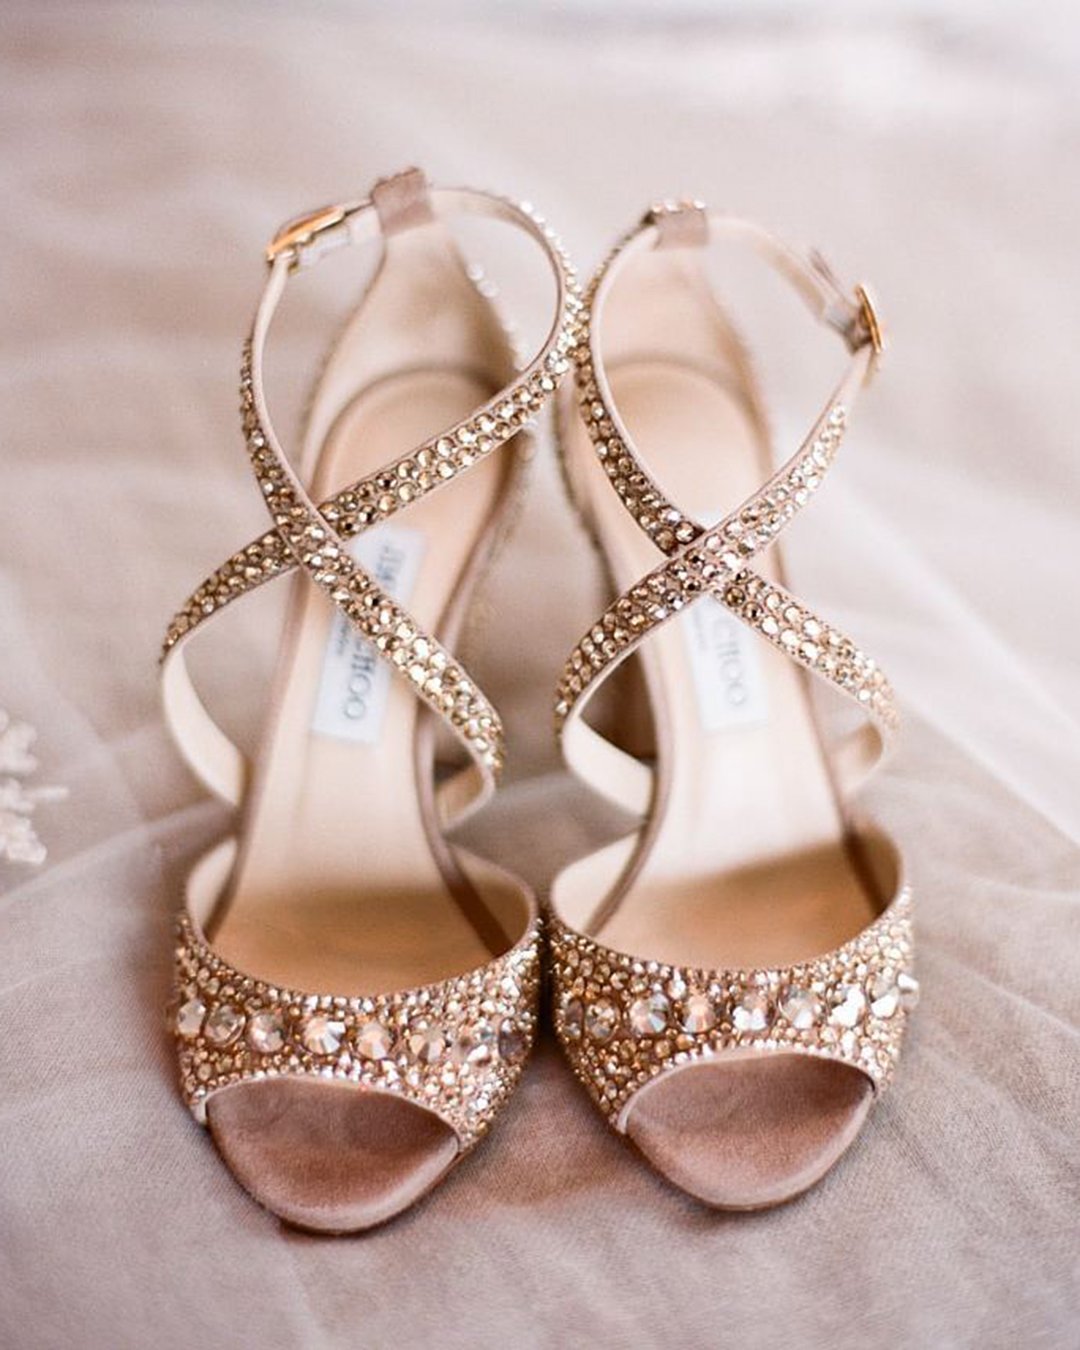 comfortable wedding shoes sparkle rose gold with stones heels jimmy choo